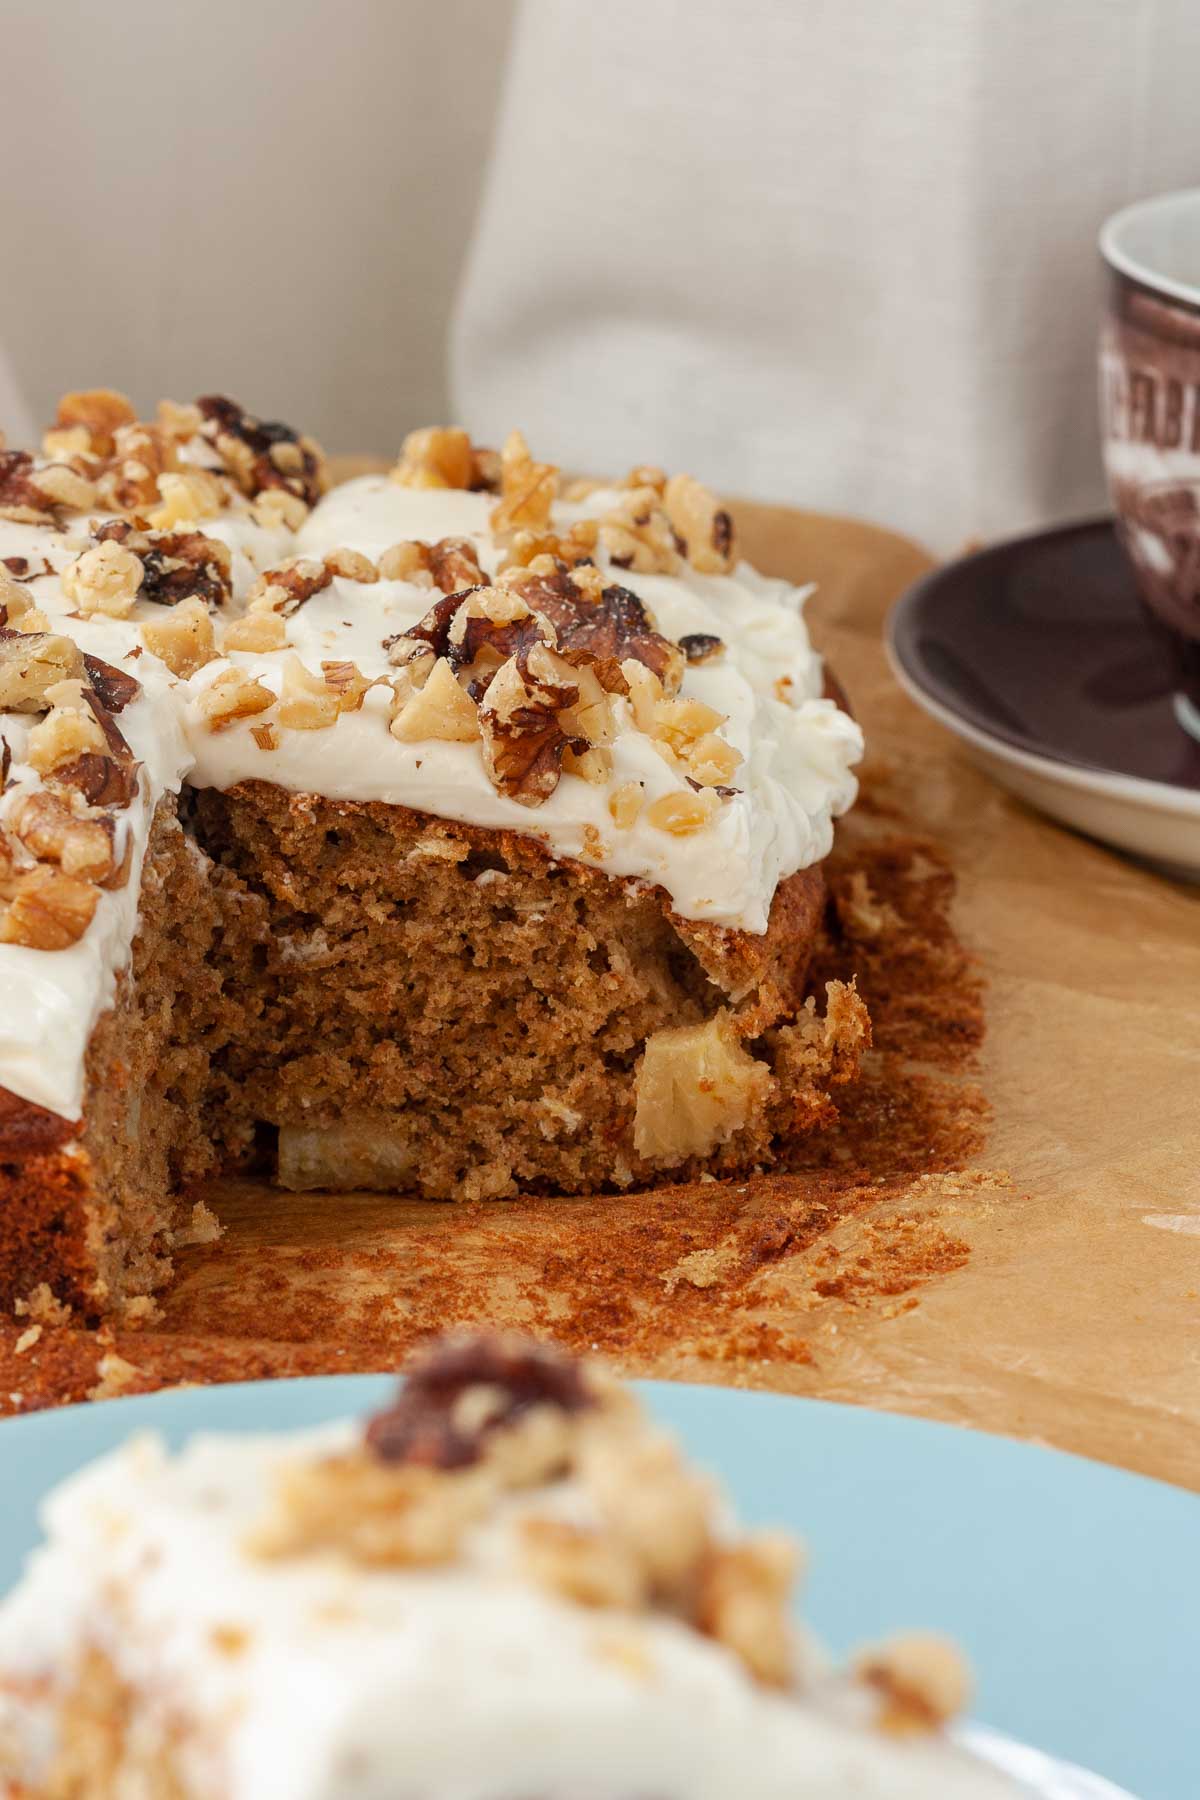 Closeup of the inside of a corner of cut pineapple banana cake with cream cheese frosting and walnuts on top, with another piece of cake in the foreground and a brown cup and saucer top right.